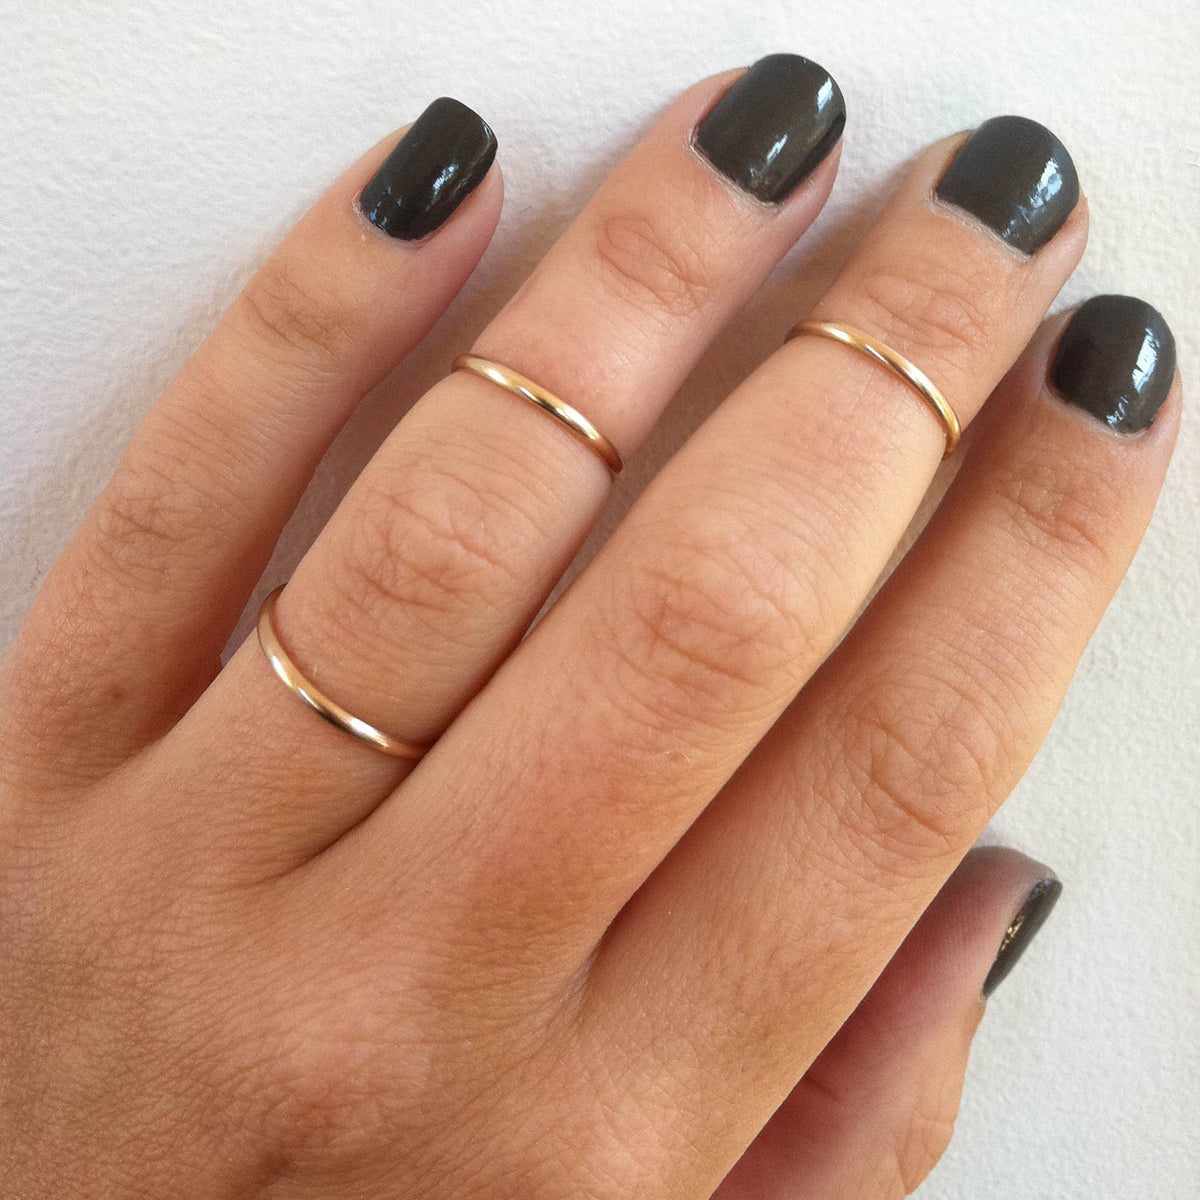 Set of 2 Stacking Knuckle Rings